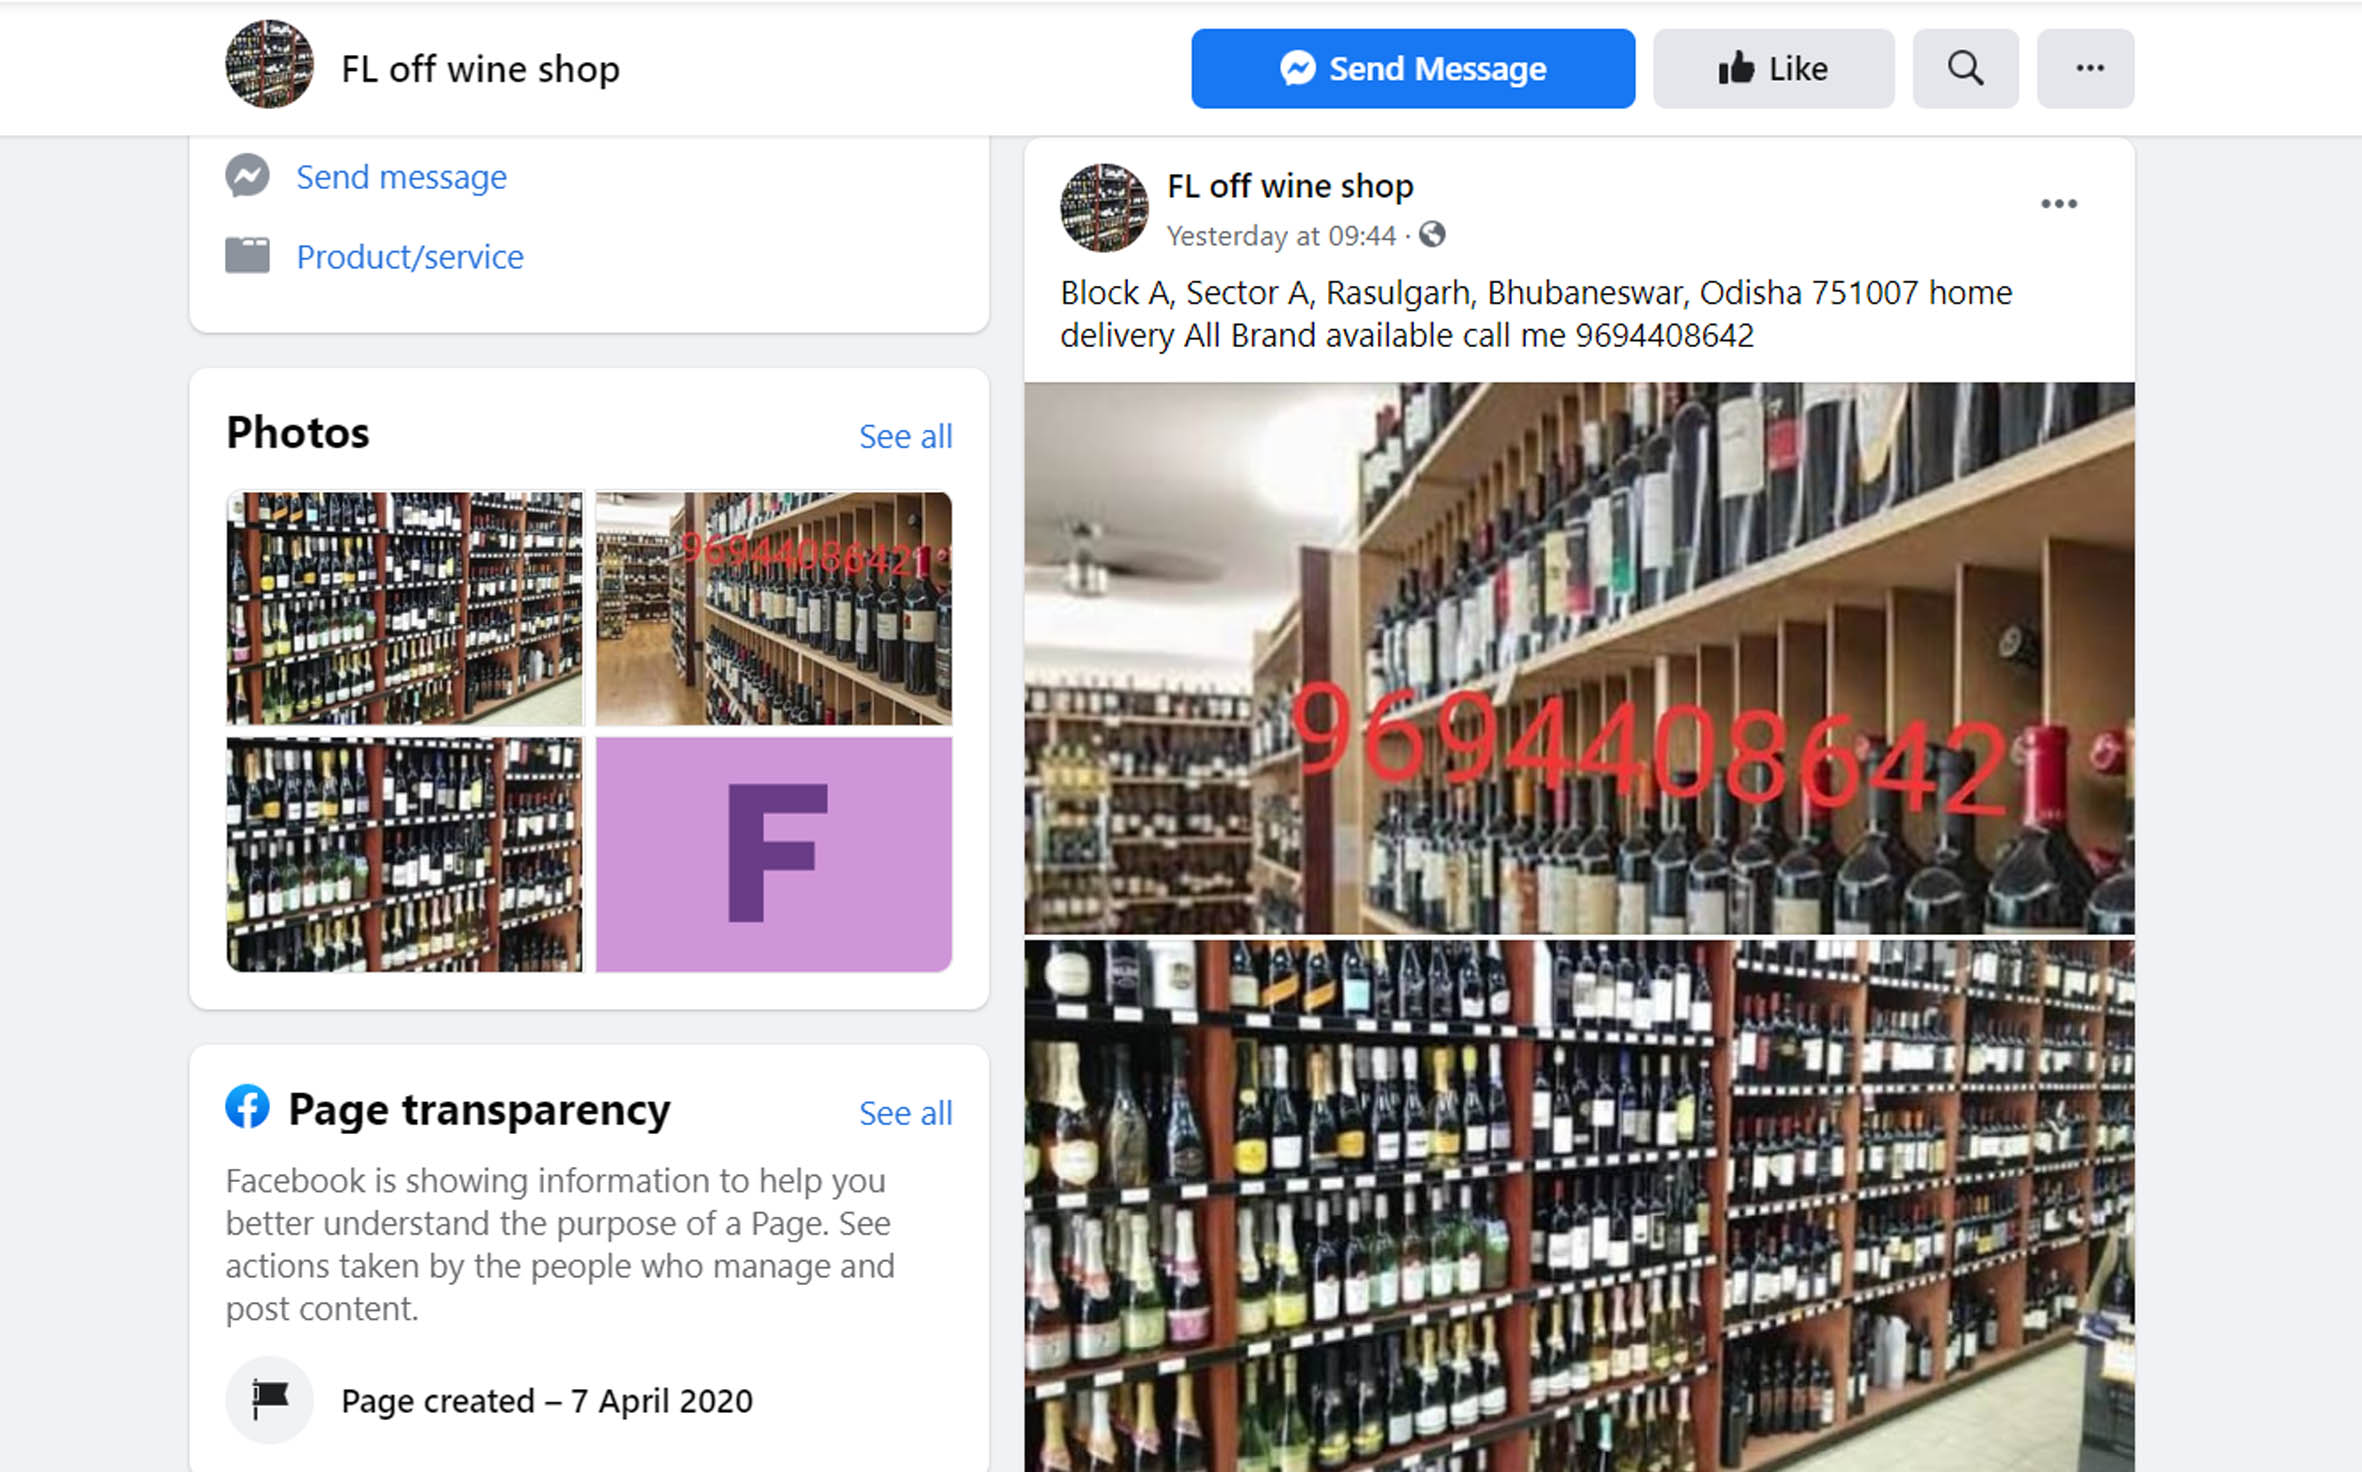 Home delivery of liquor is a hoax to trap facebook users